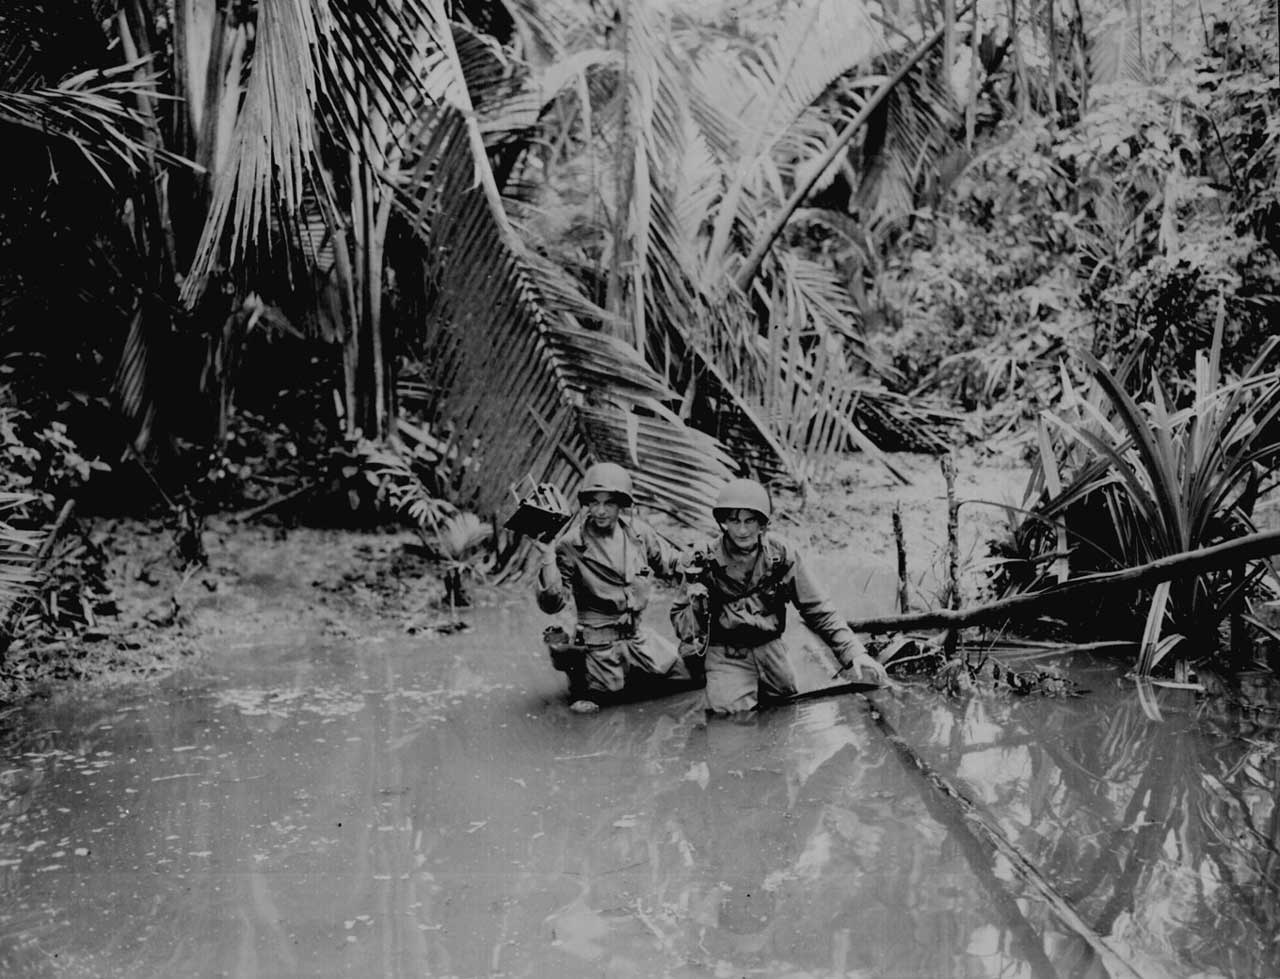 US Signal Corps cameramen Carl Weinke and Ernest Marjoram at Hollandia, New Guinea, 22 Apr 1944 (US National Archives)